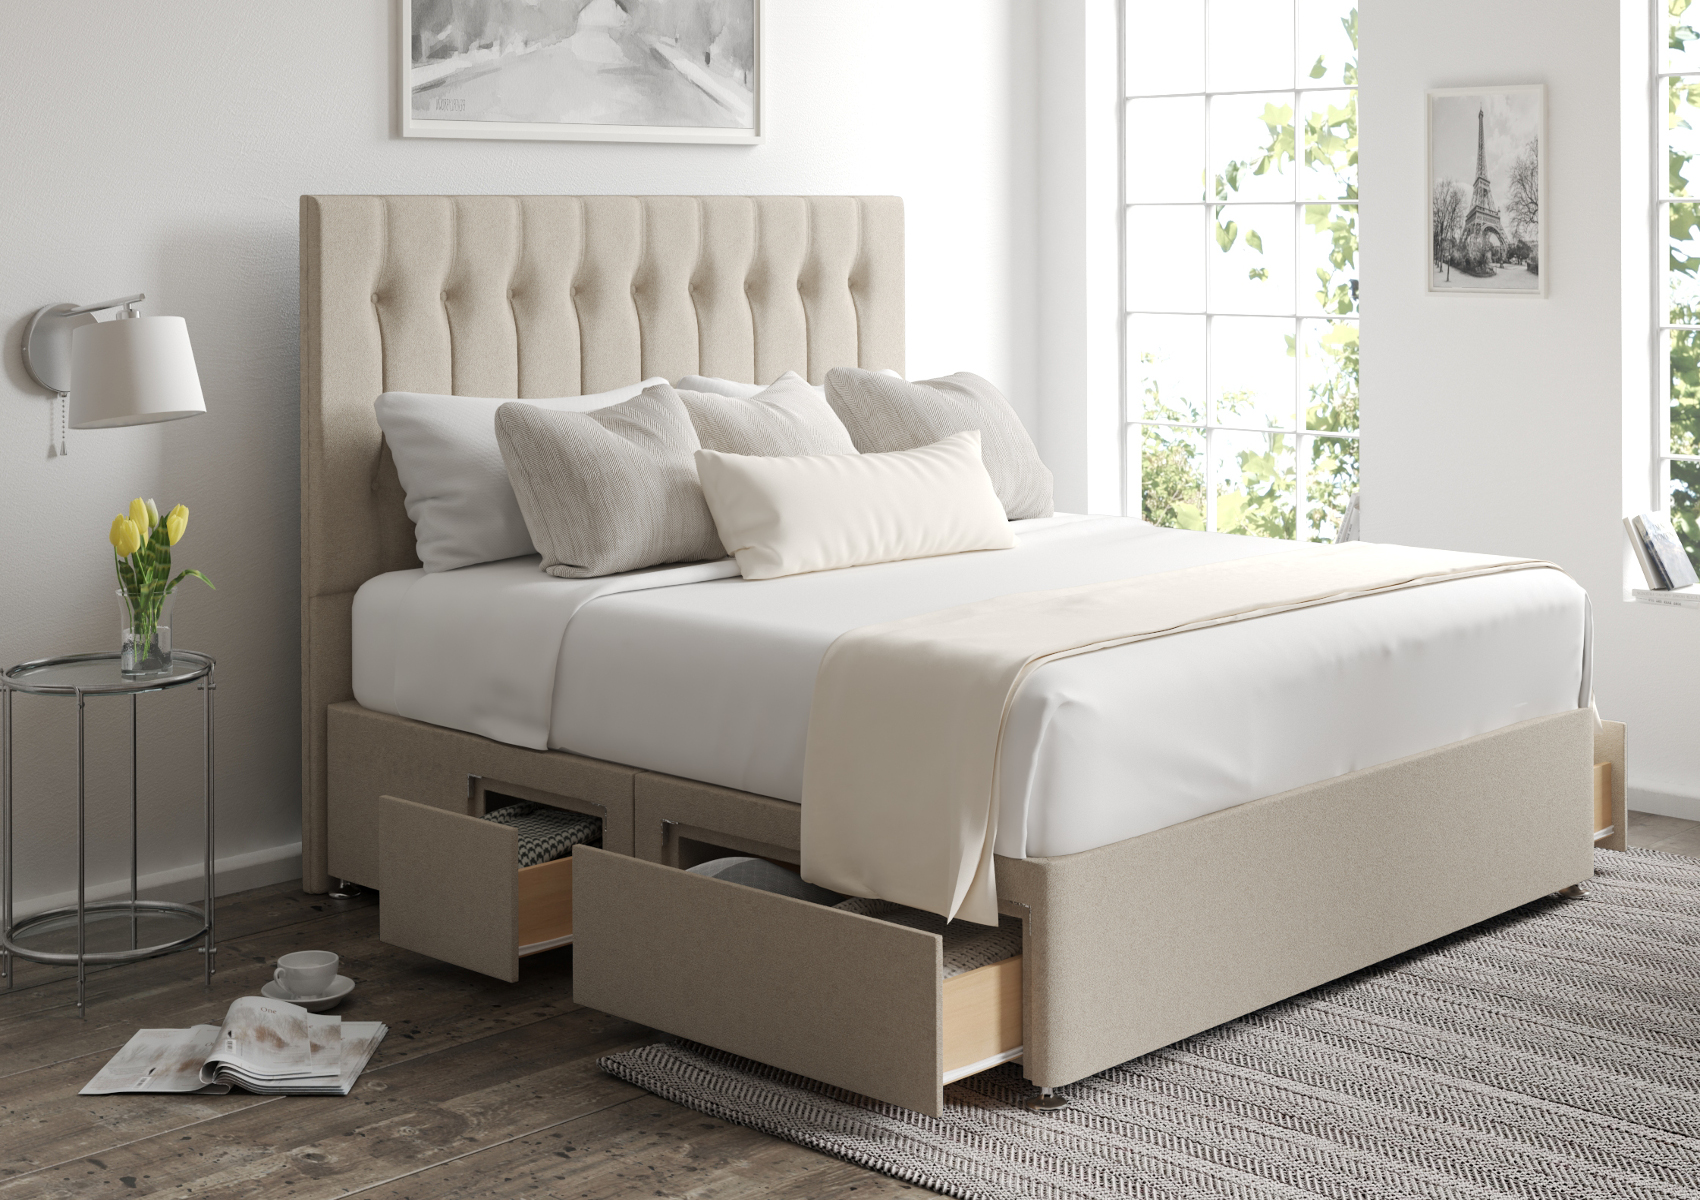 View Rylee Arran Natural Upholstered Double Bed Time4Sleep information